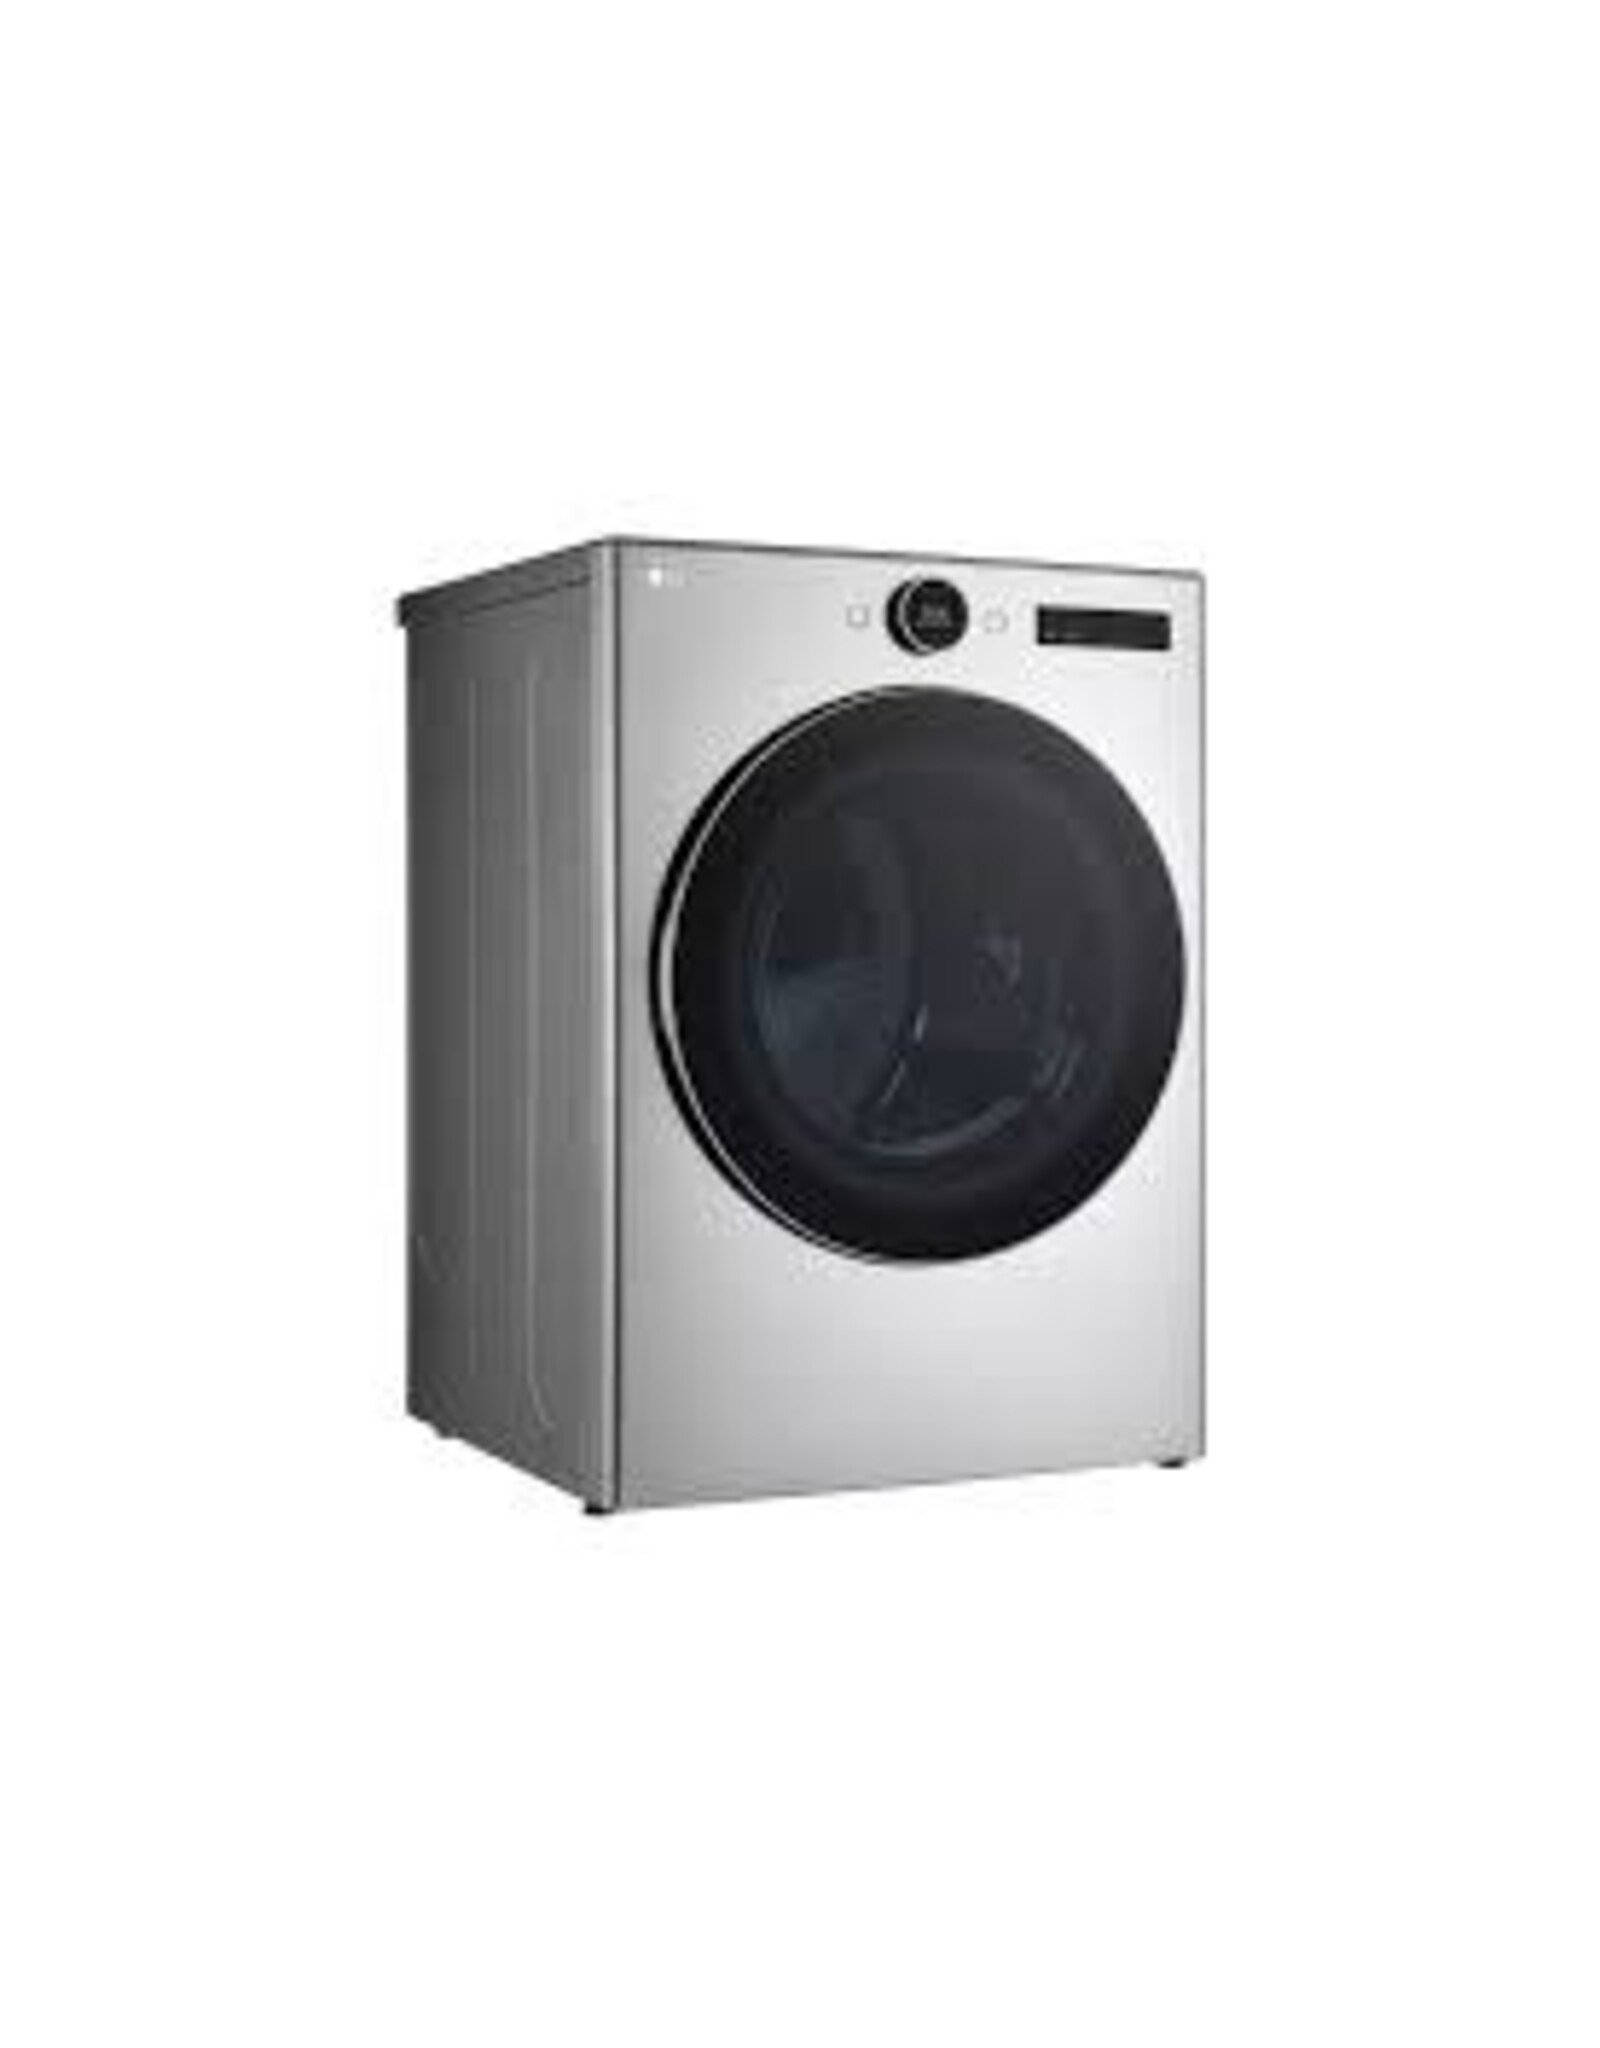 LG Electronics DLEX5500V 7.4 cu.ft. Ultra Large Electric Dryer with Sensor Dry, TurboSteam Technology and WiFi Connectivity in Graphite Steel